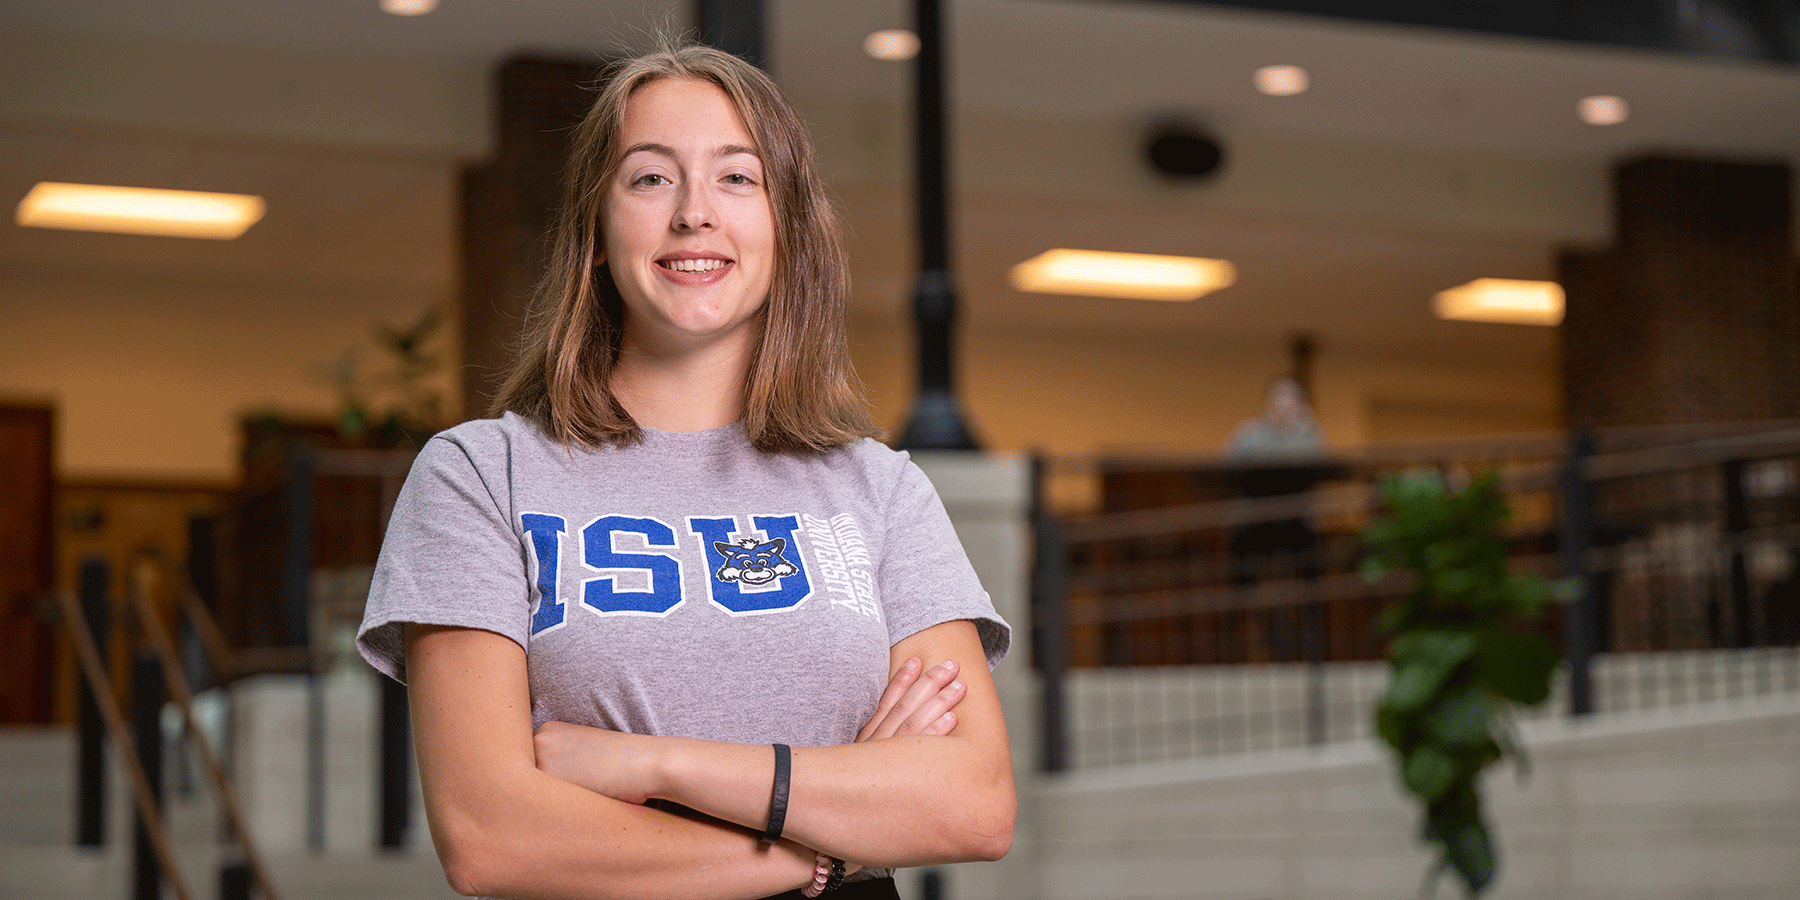 A female student with shoulder-length brown hair. She wears a grey-and-blue ISU T-shirt, and she poses with her arms crossed in an atrium.